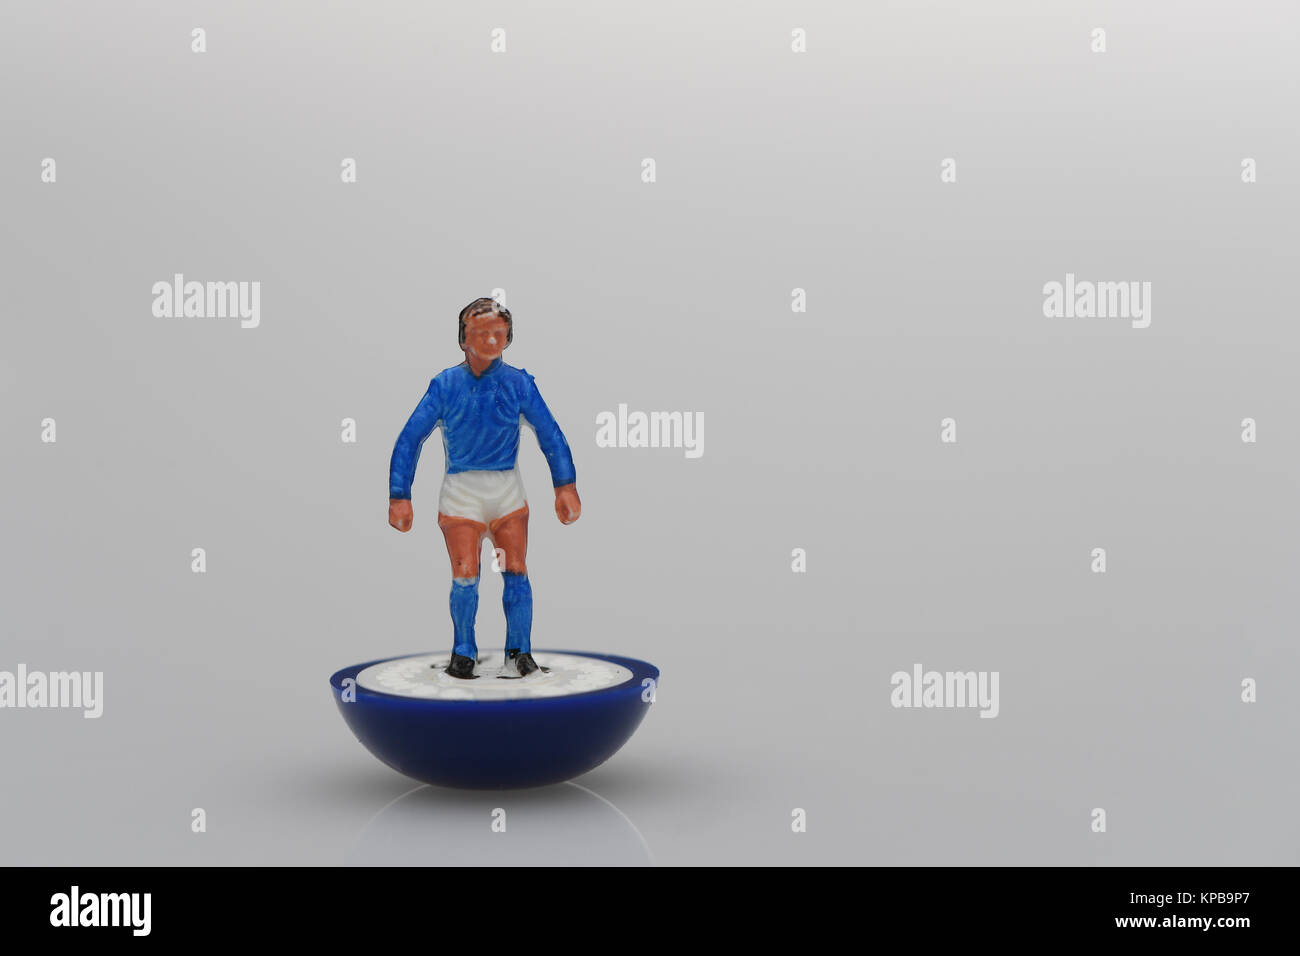 A single Subbuteo player in blue kit. Possible use as concept image. Stock Photo